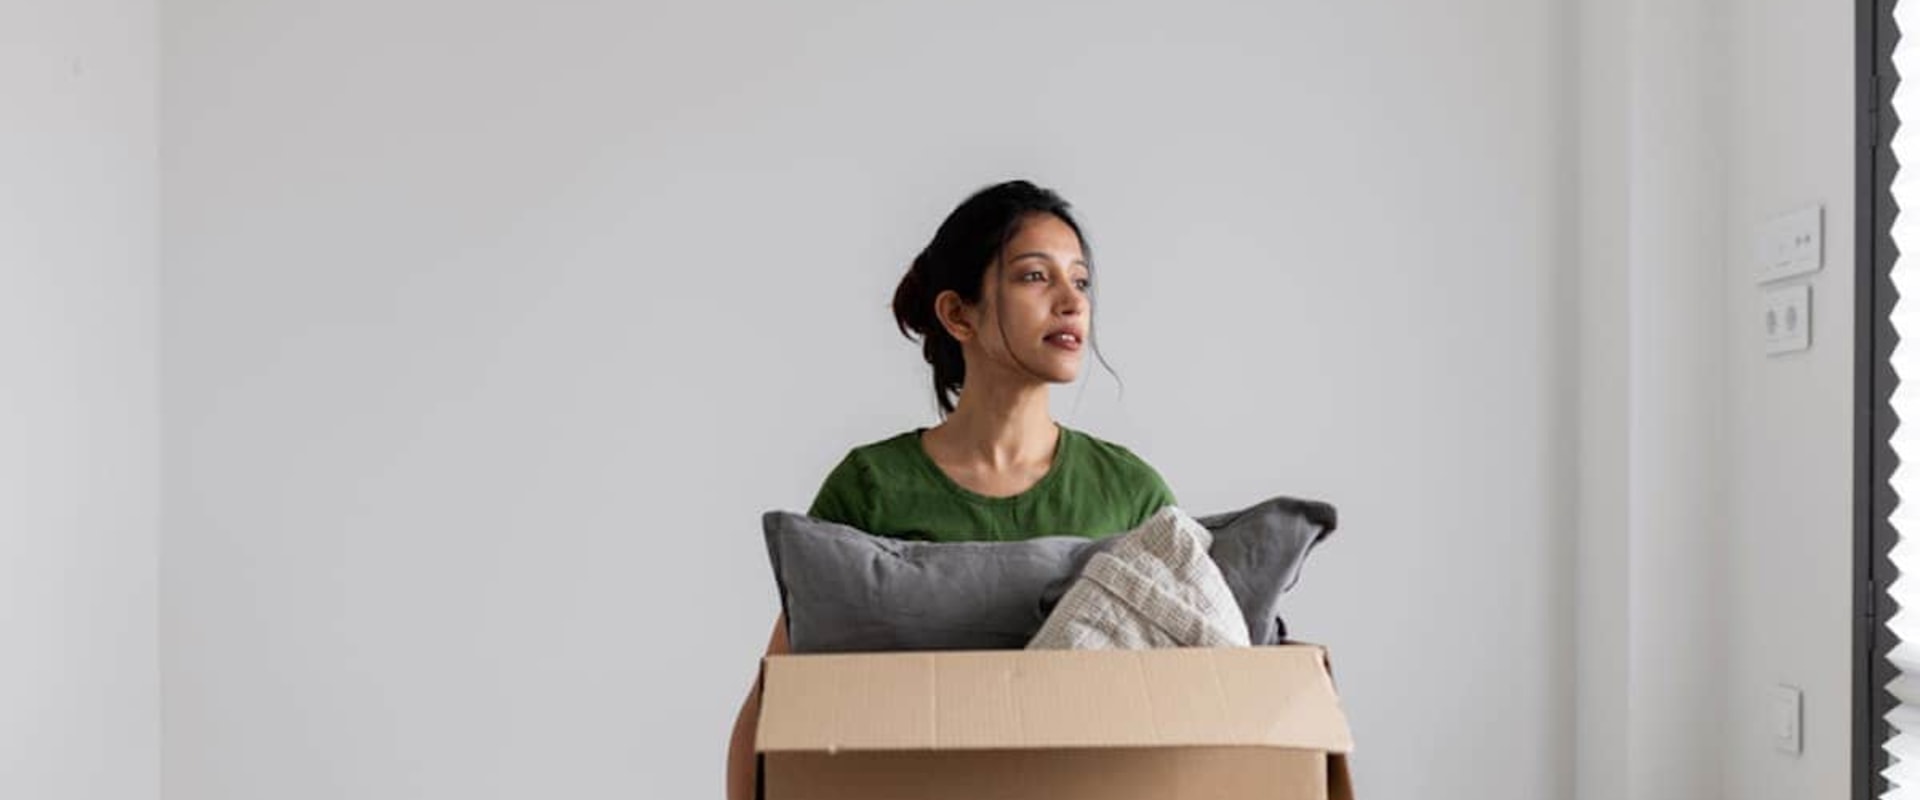 What is a Reasonable Amount for Moving Expenses?